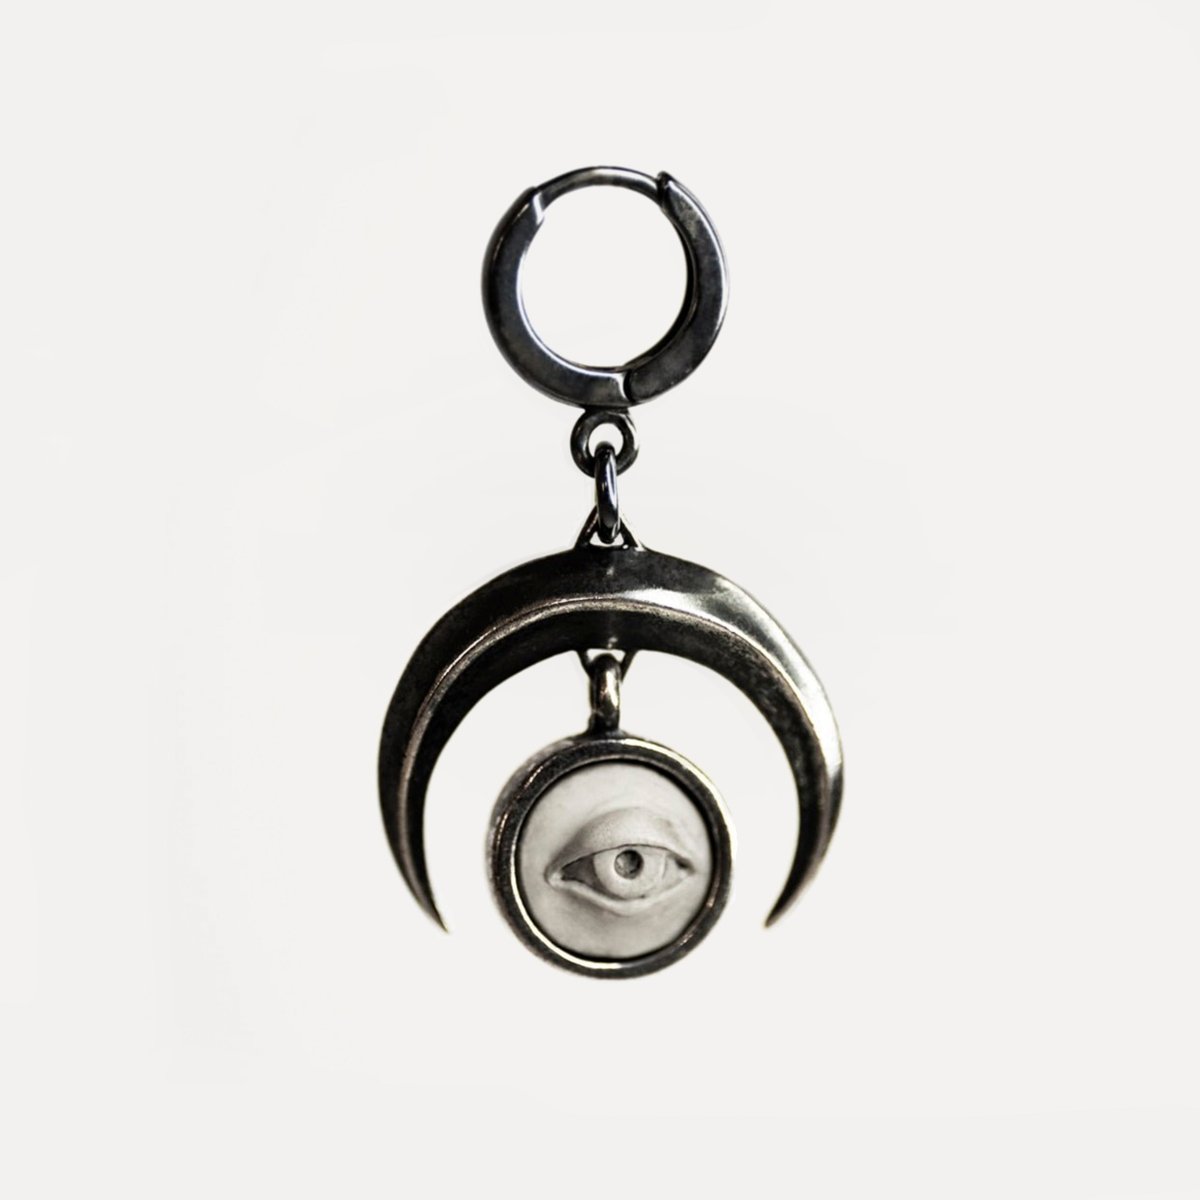 Crescent Oracle earring - Macabre Gadgets